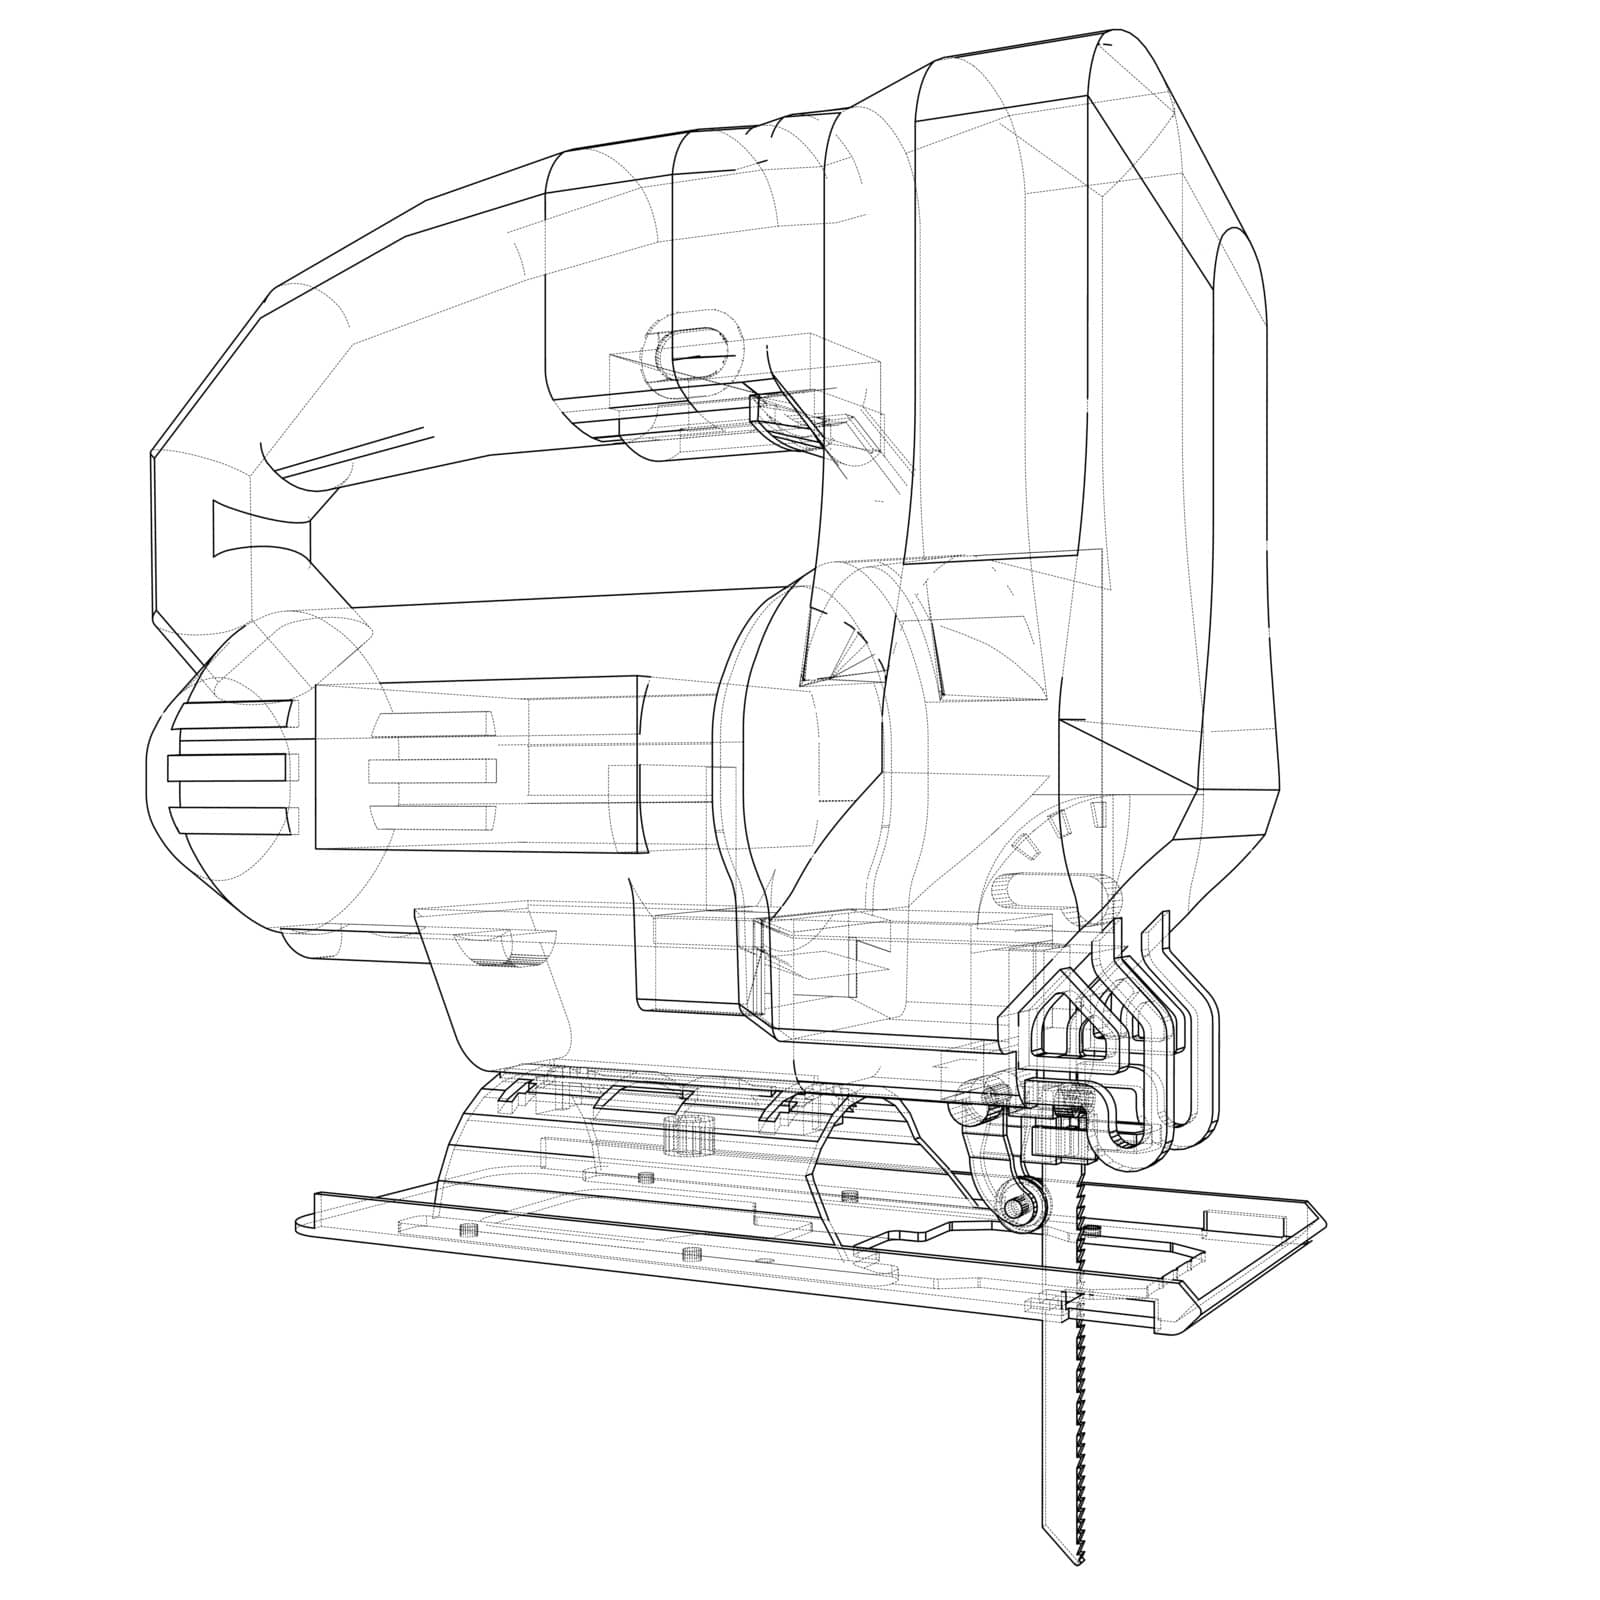 Outline Jig saw. Vector image rendered from 3d model in sketch style or drawing. Blue background